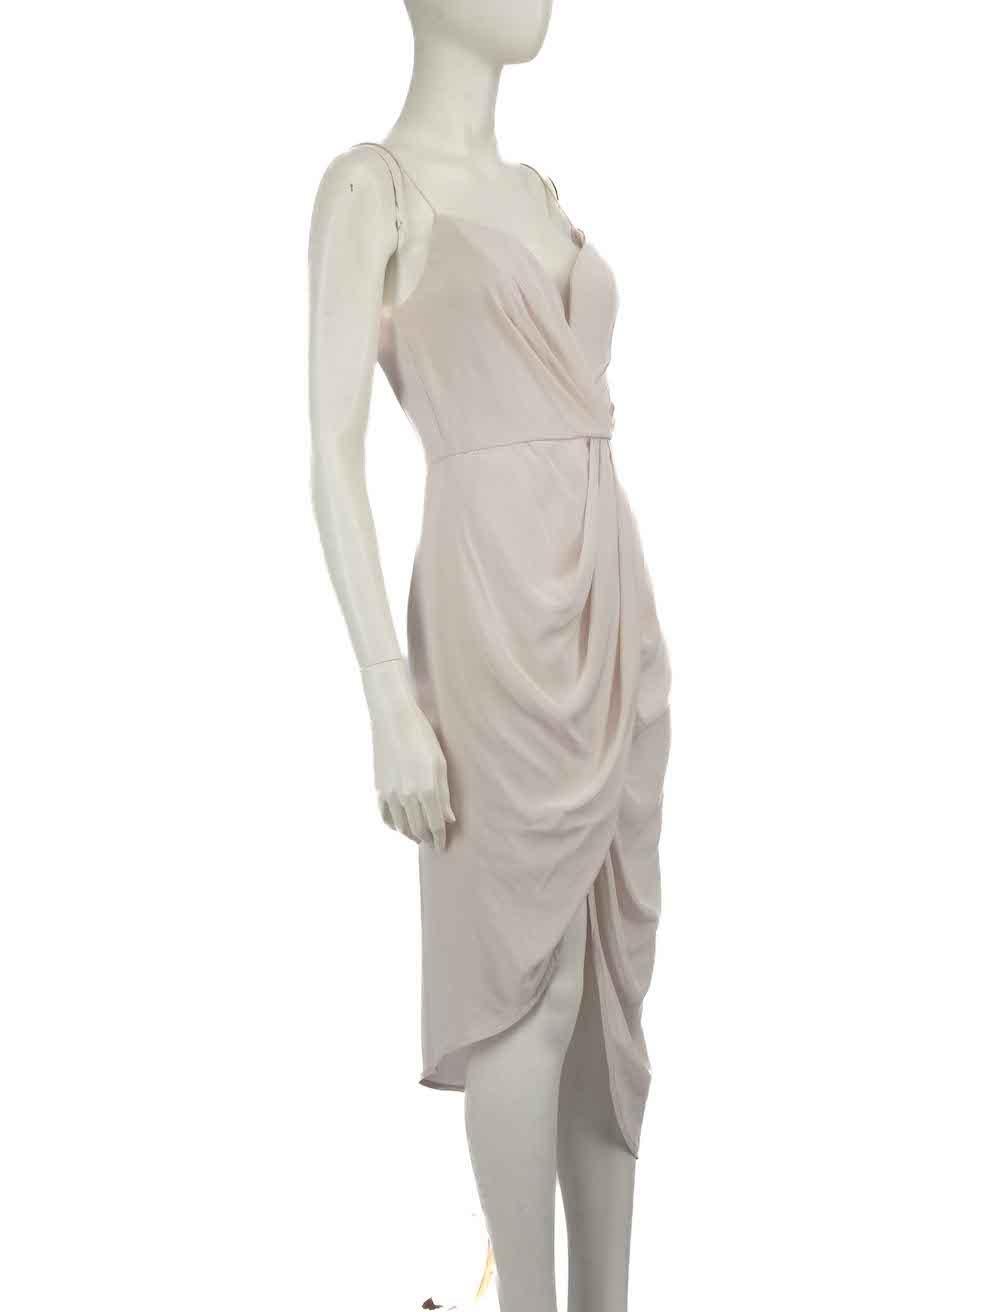 CONDITION is Very good. Minimal wear to dress is evident. Minimal wear to the left side hem, where there is a small mark on this used Zimmerman designer resale item.
 
 
 
 Details
 
 
 Pink
 
 Silk
 
 Dress
 
 Sleeveless
 
 Plunge neck
 
 Front